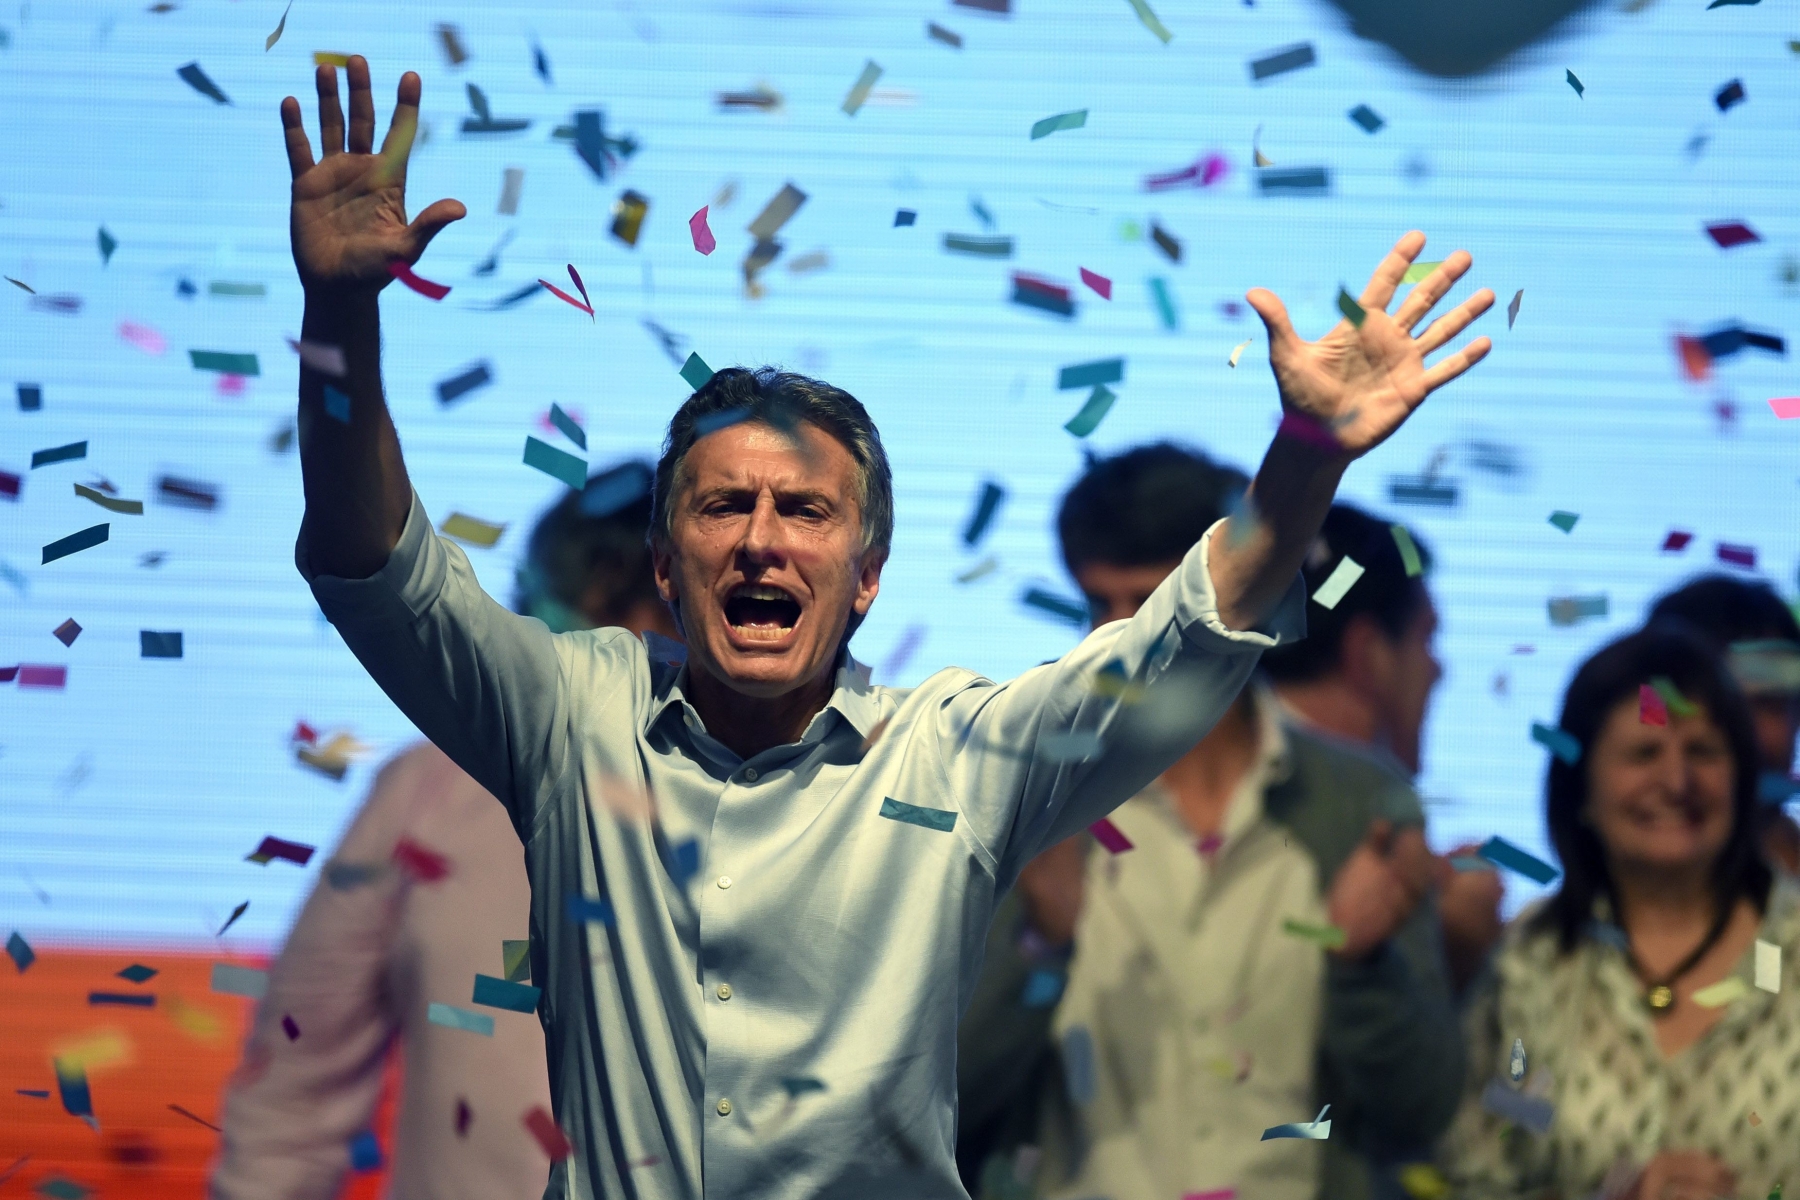 epa04996391 Argentinian presidential candidate Mauricio Macri (C) of the centre-right political coalition Cambiemos (Let's change) celebrates in front of supporters in Buenos Aires, Argentina, 25 October 2015. According to according to the polls, Macri came second in Argentina's presidential election, forcing a runoff against the ruling party of presidential candidate Daniel Scioli.  EPA/JUAN IGNACIO RONCORONI ARGENTINA ELECTIONS